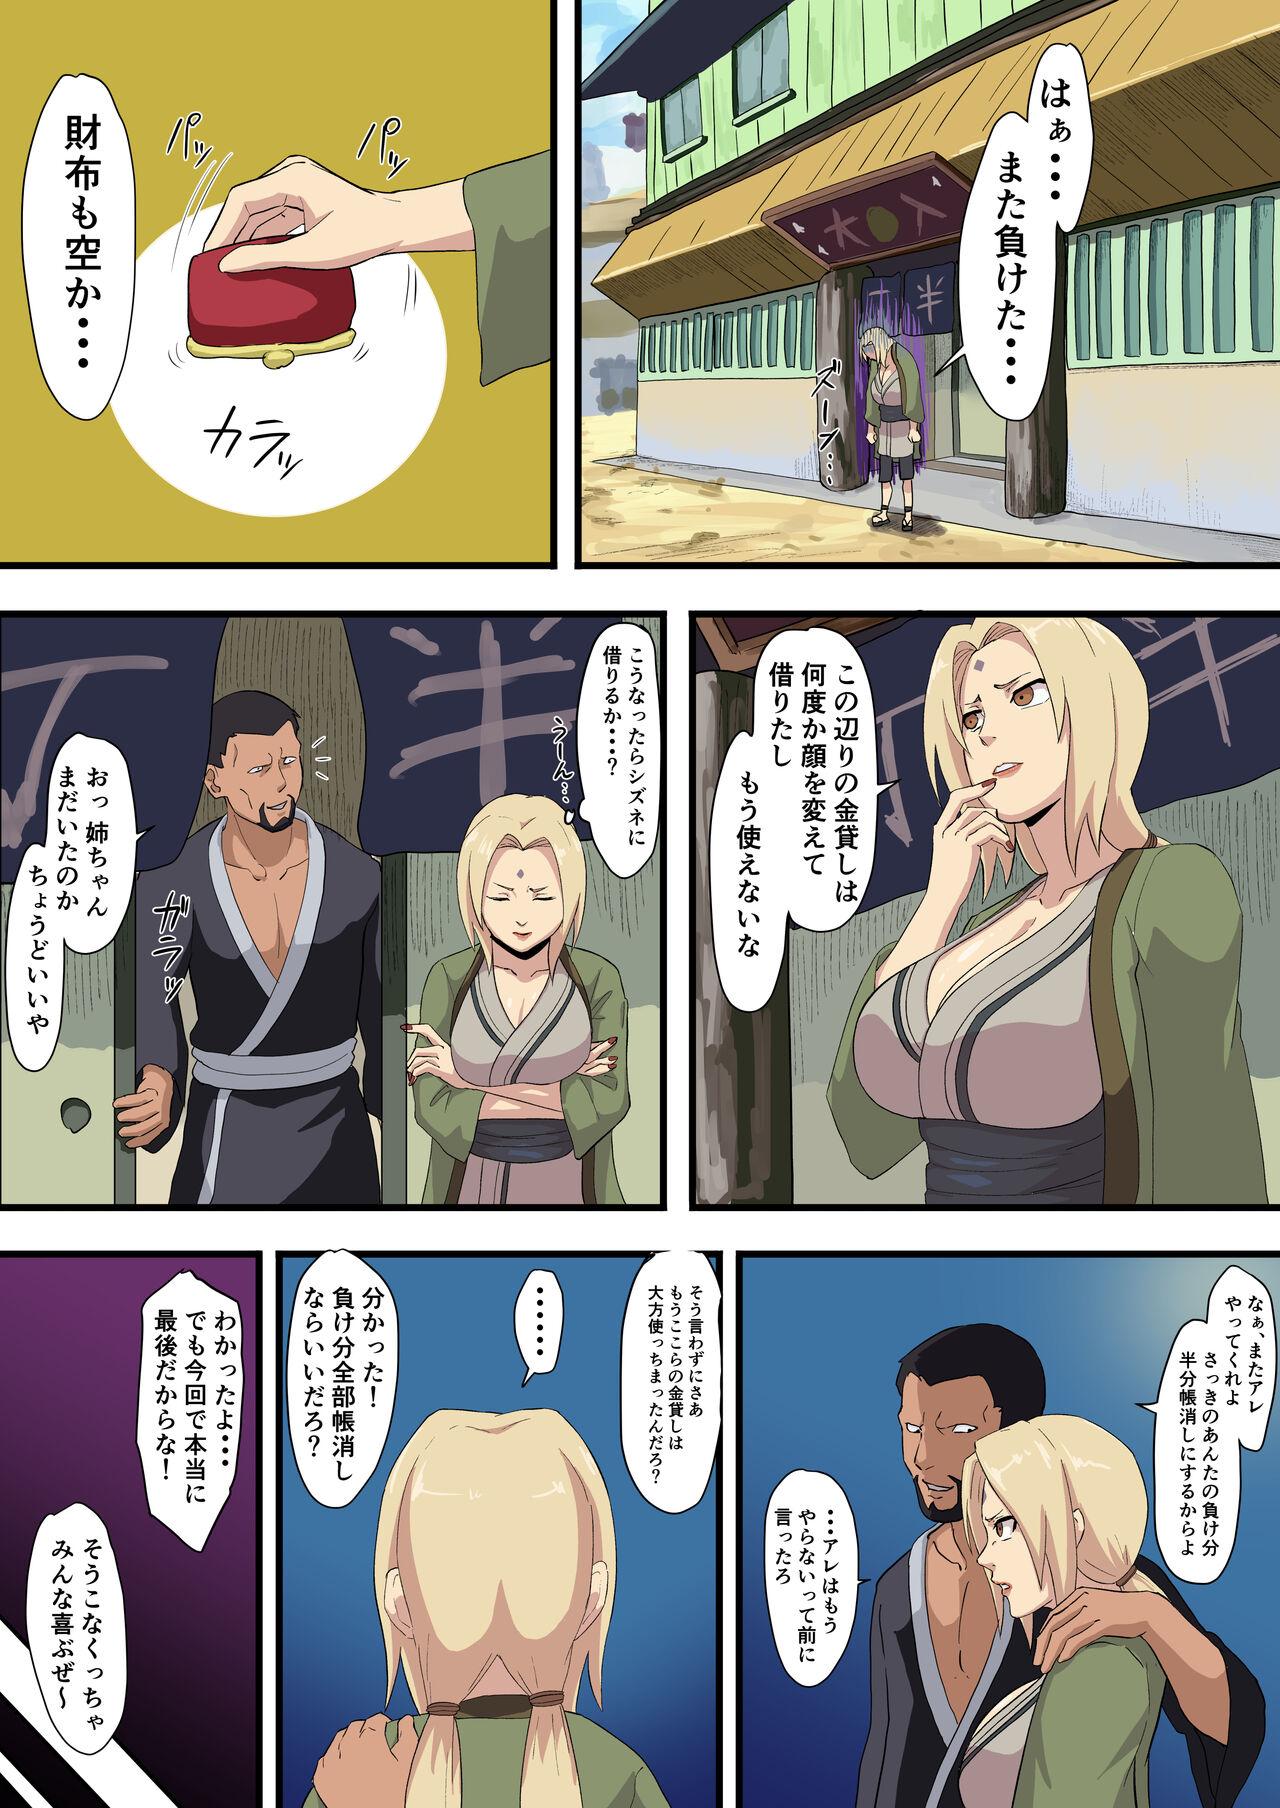 Class Room Tsunade paying debt - Naruto Gaycum - Picture 2